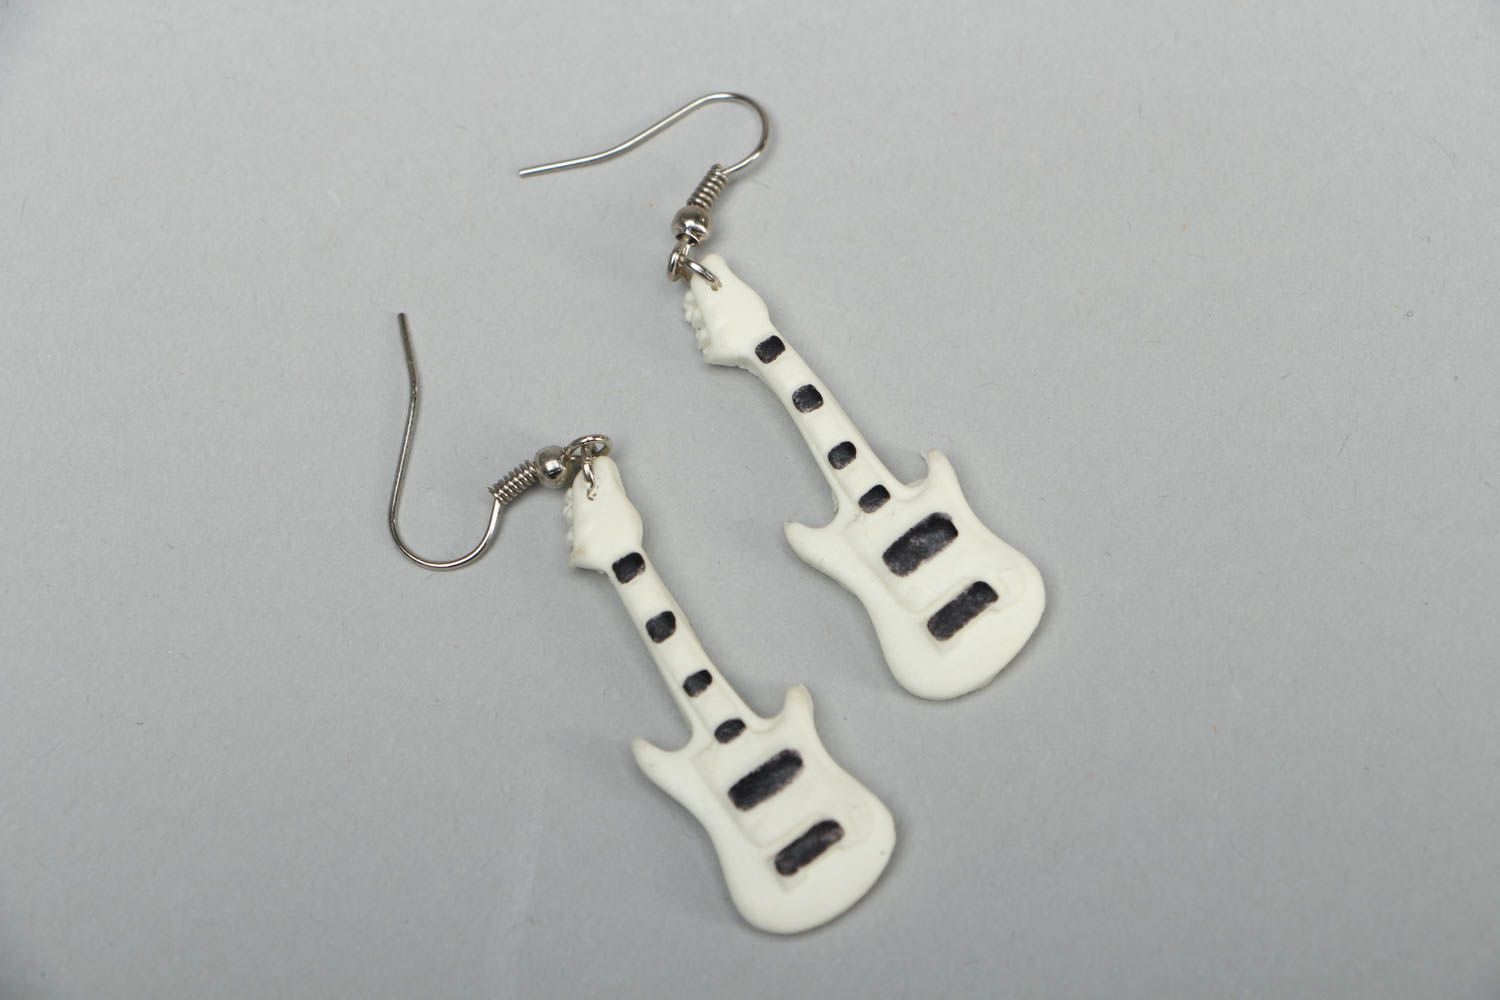 Polymer clay earrings in the shape of guitars photo 1